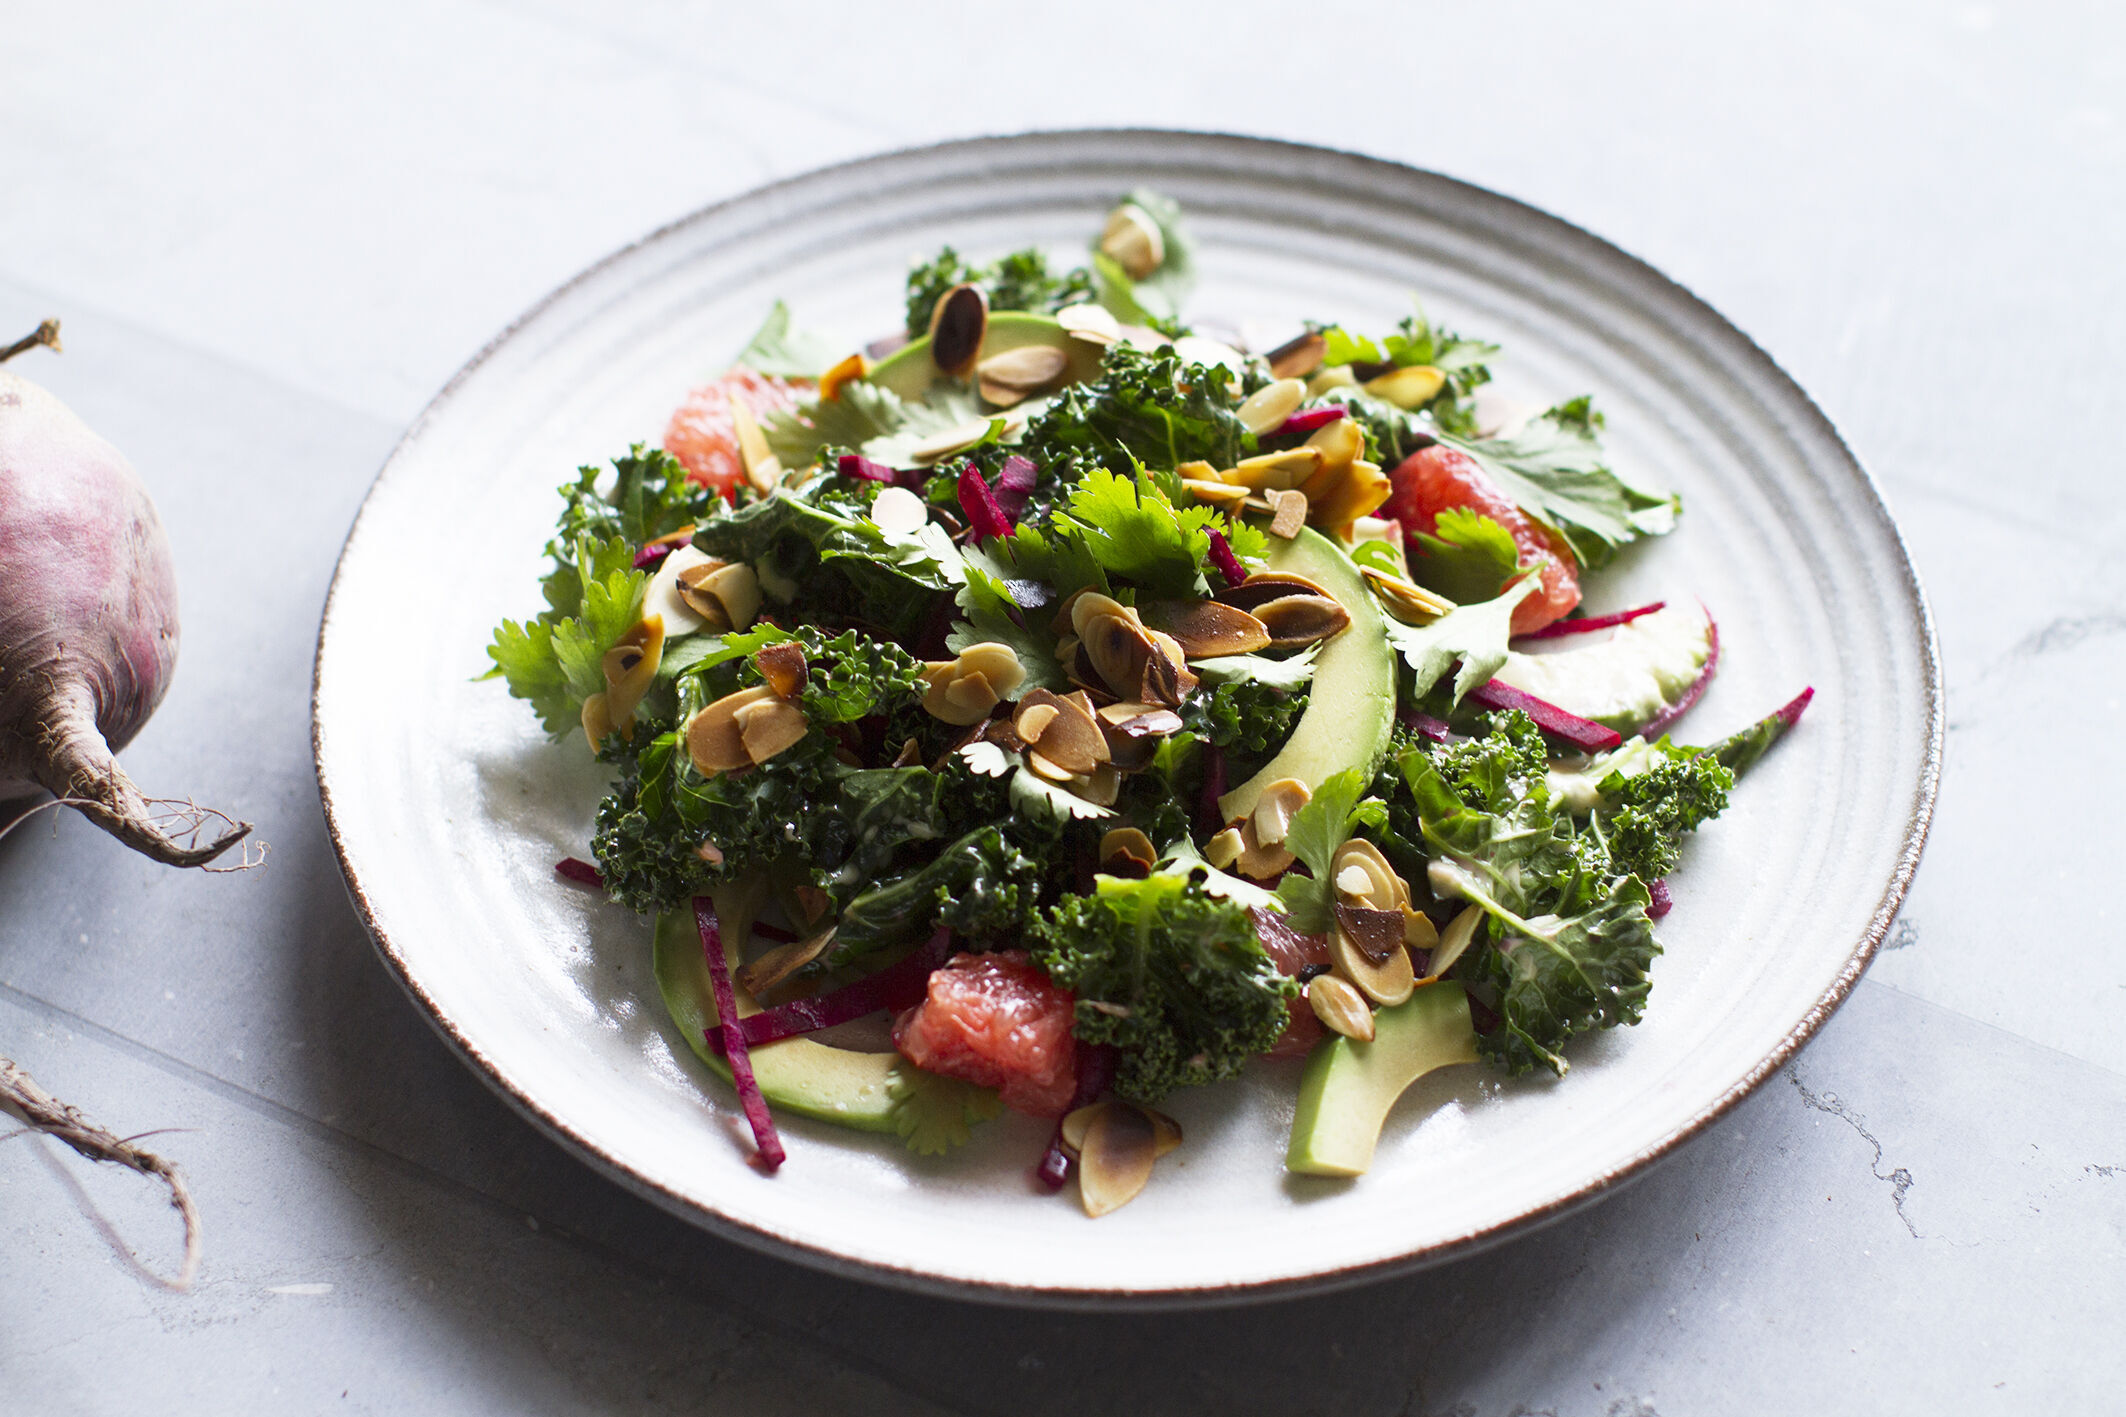 Working from home? Treat yourself to this delicious superfood salad with umami dressing